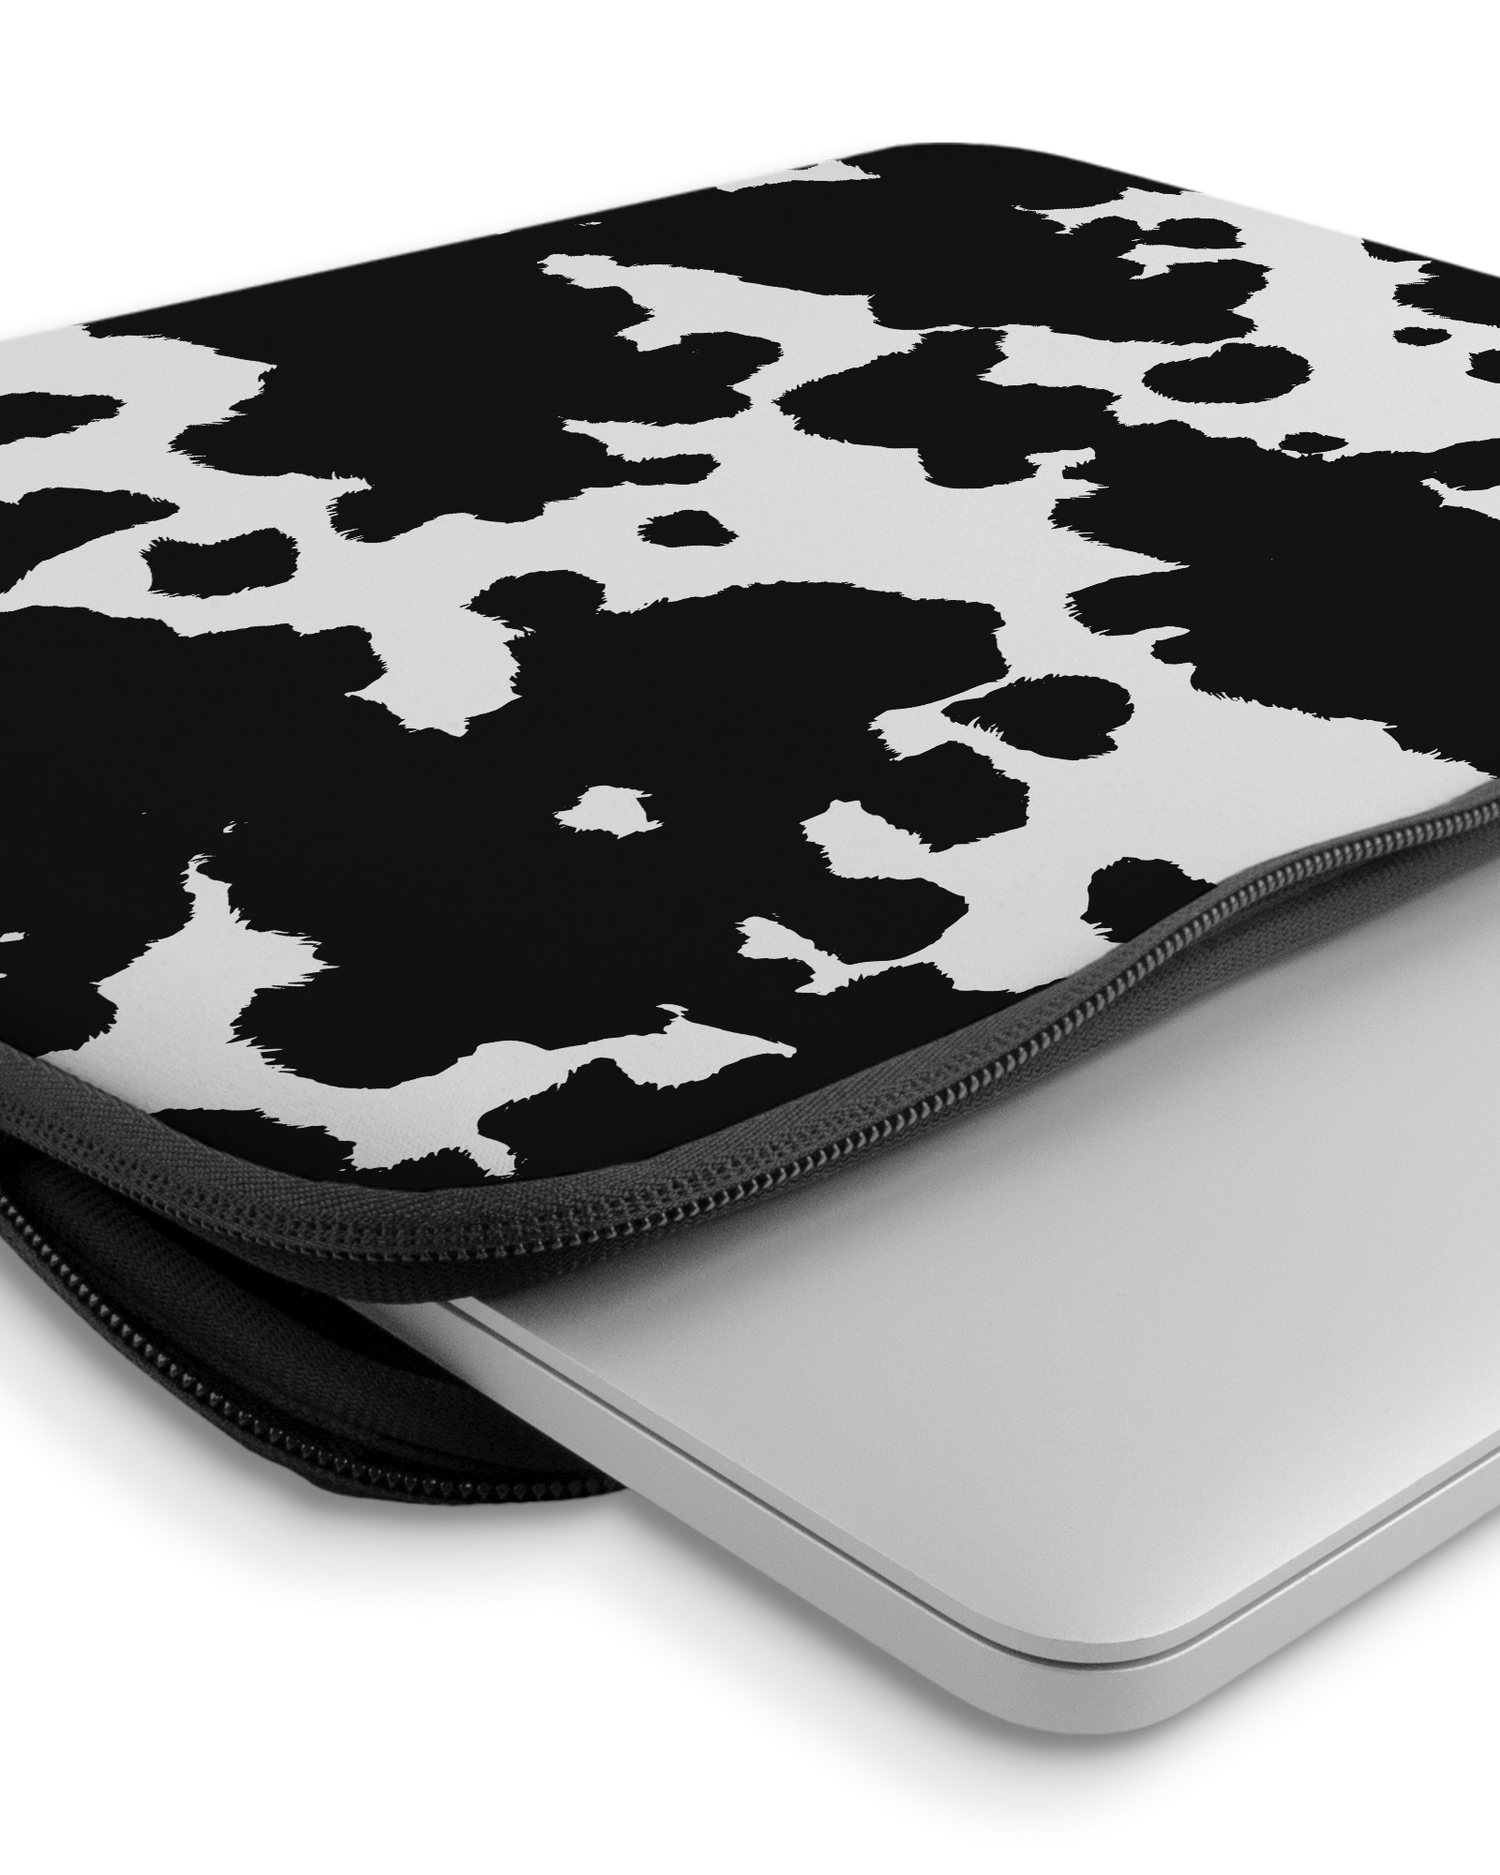 Cow Print Laptop Case 14-15 inch with device inside